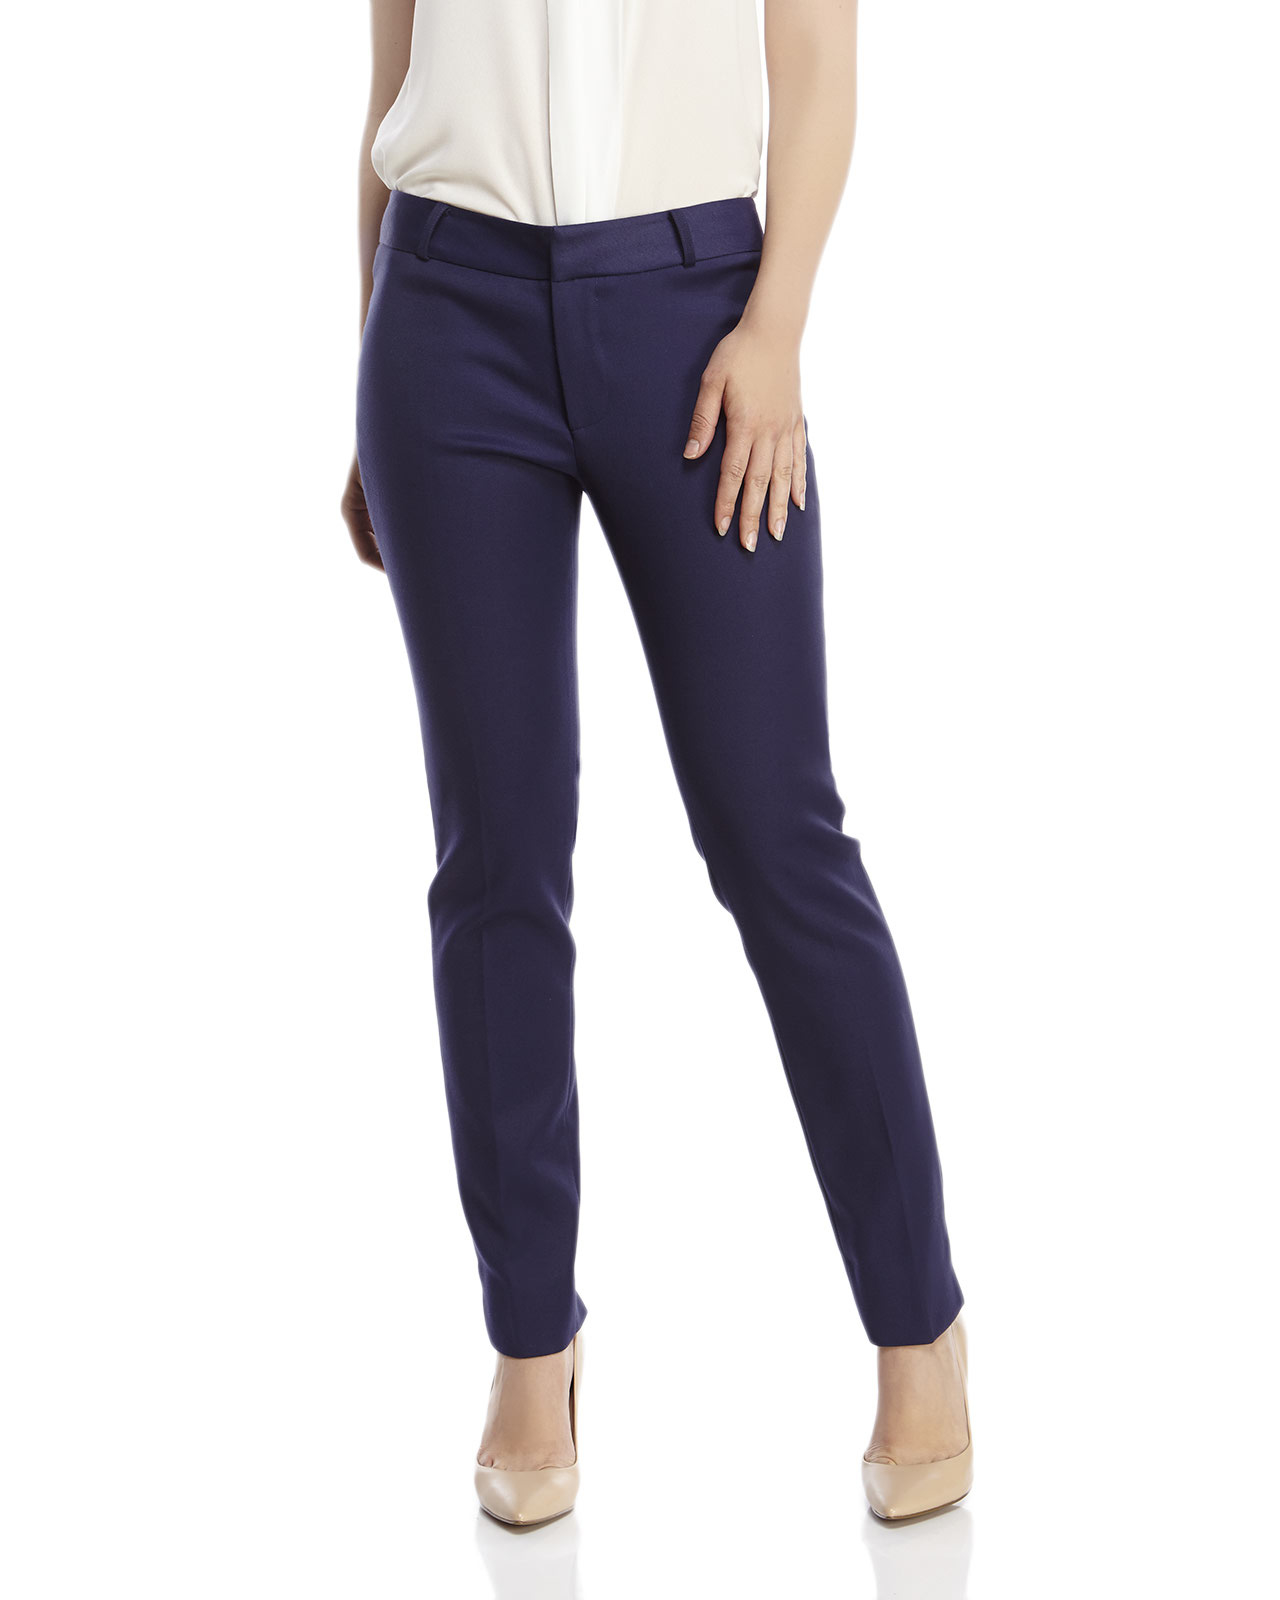 Lyst - Raoul Navy Super Skinny Pants in Blue